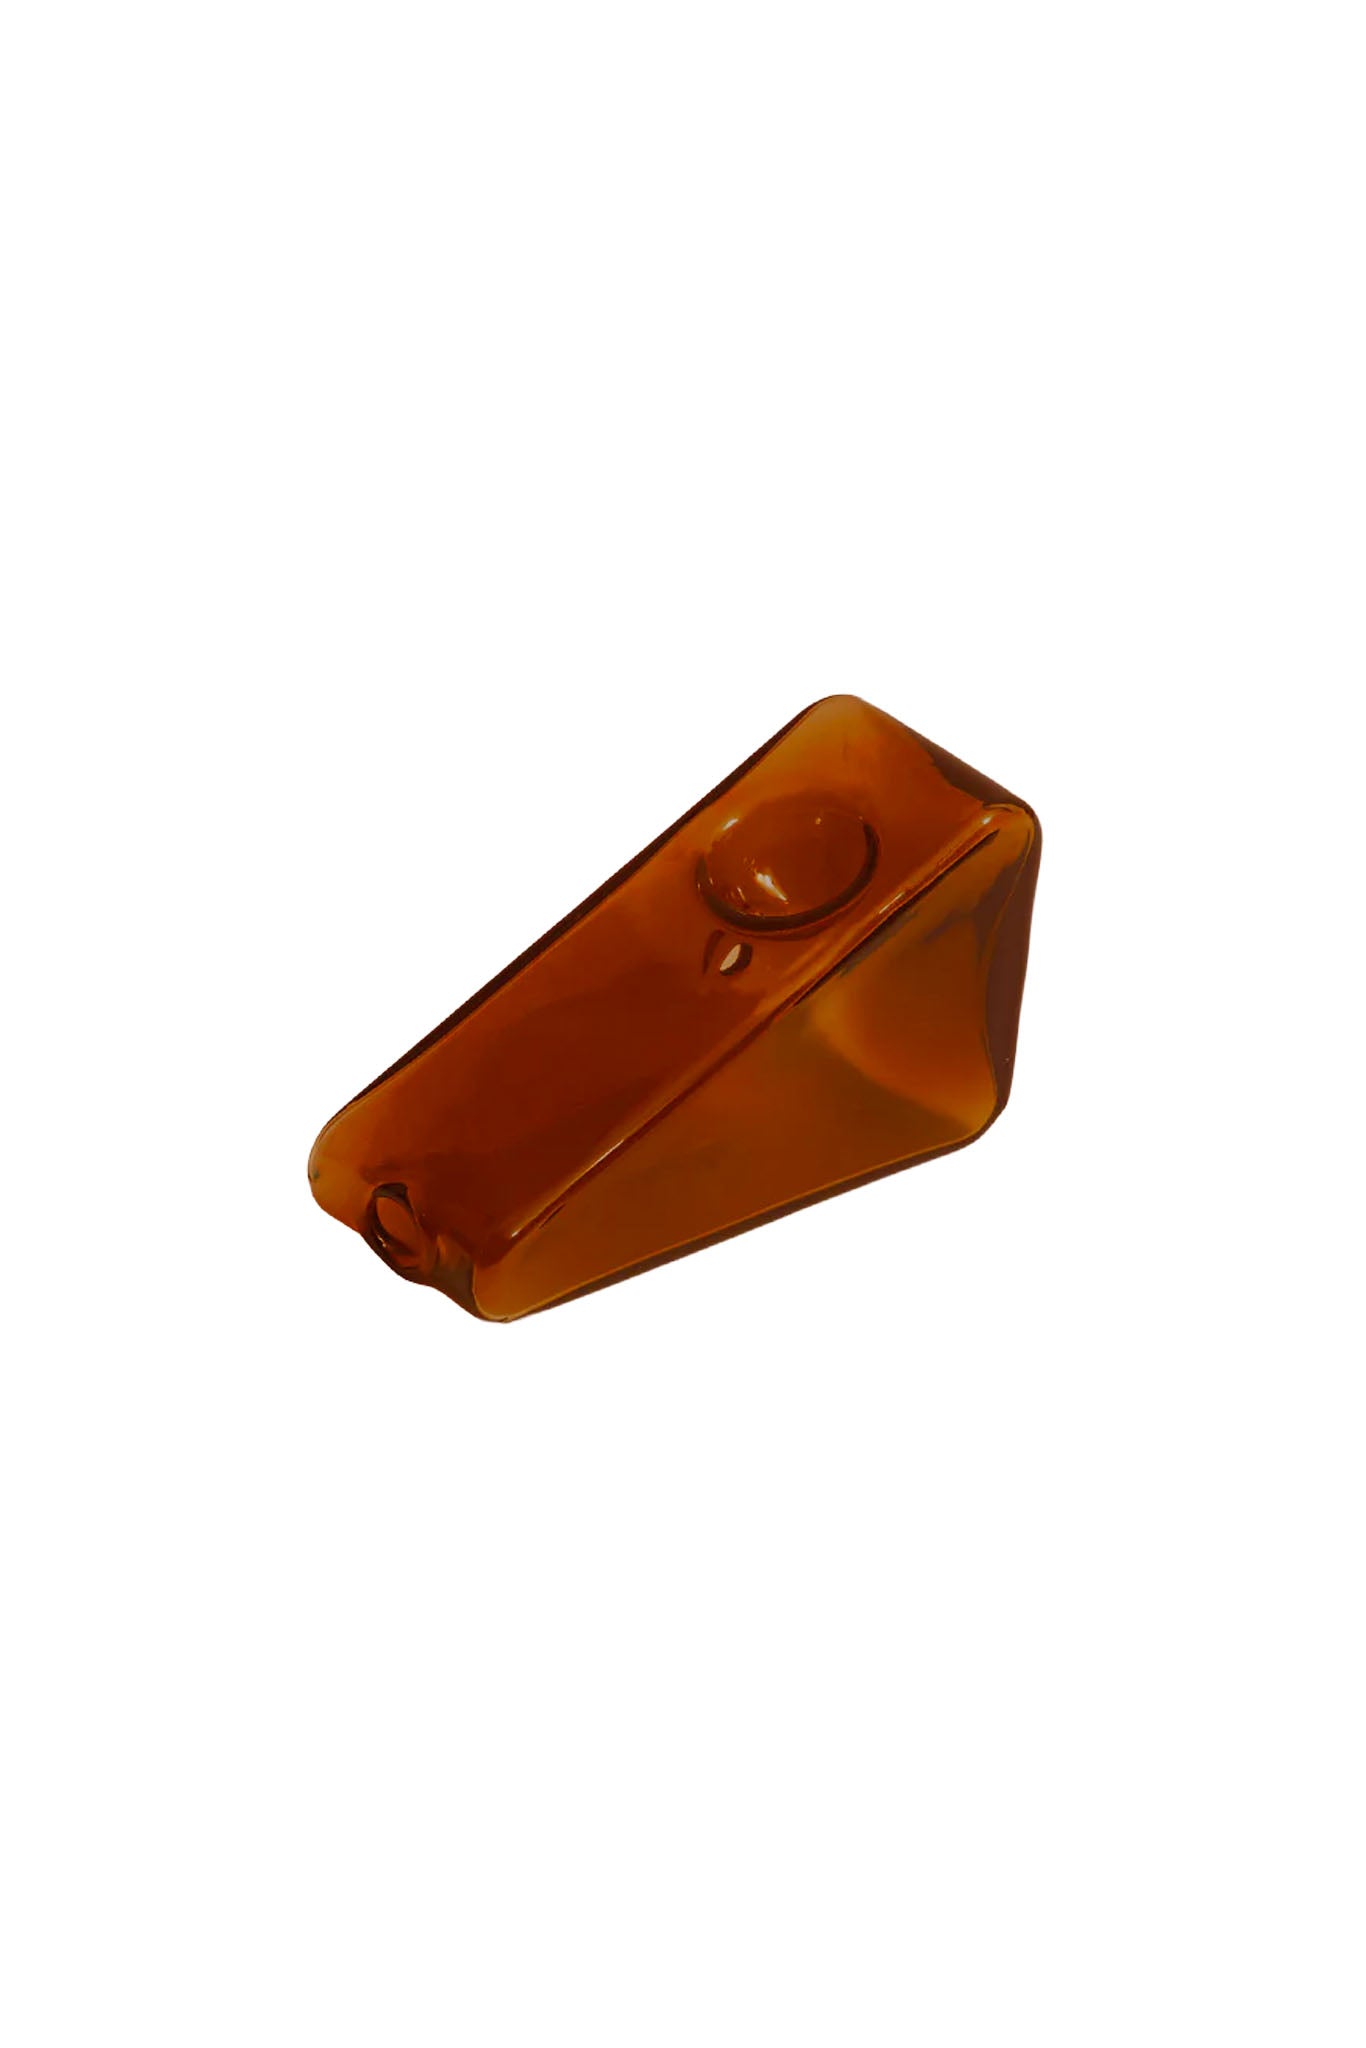 Amber Triangle Pipe